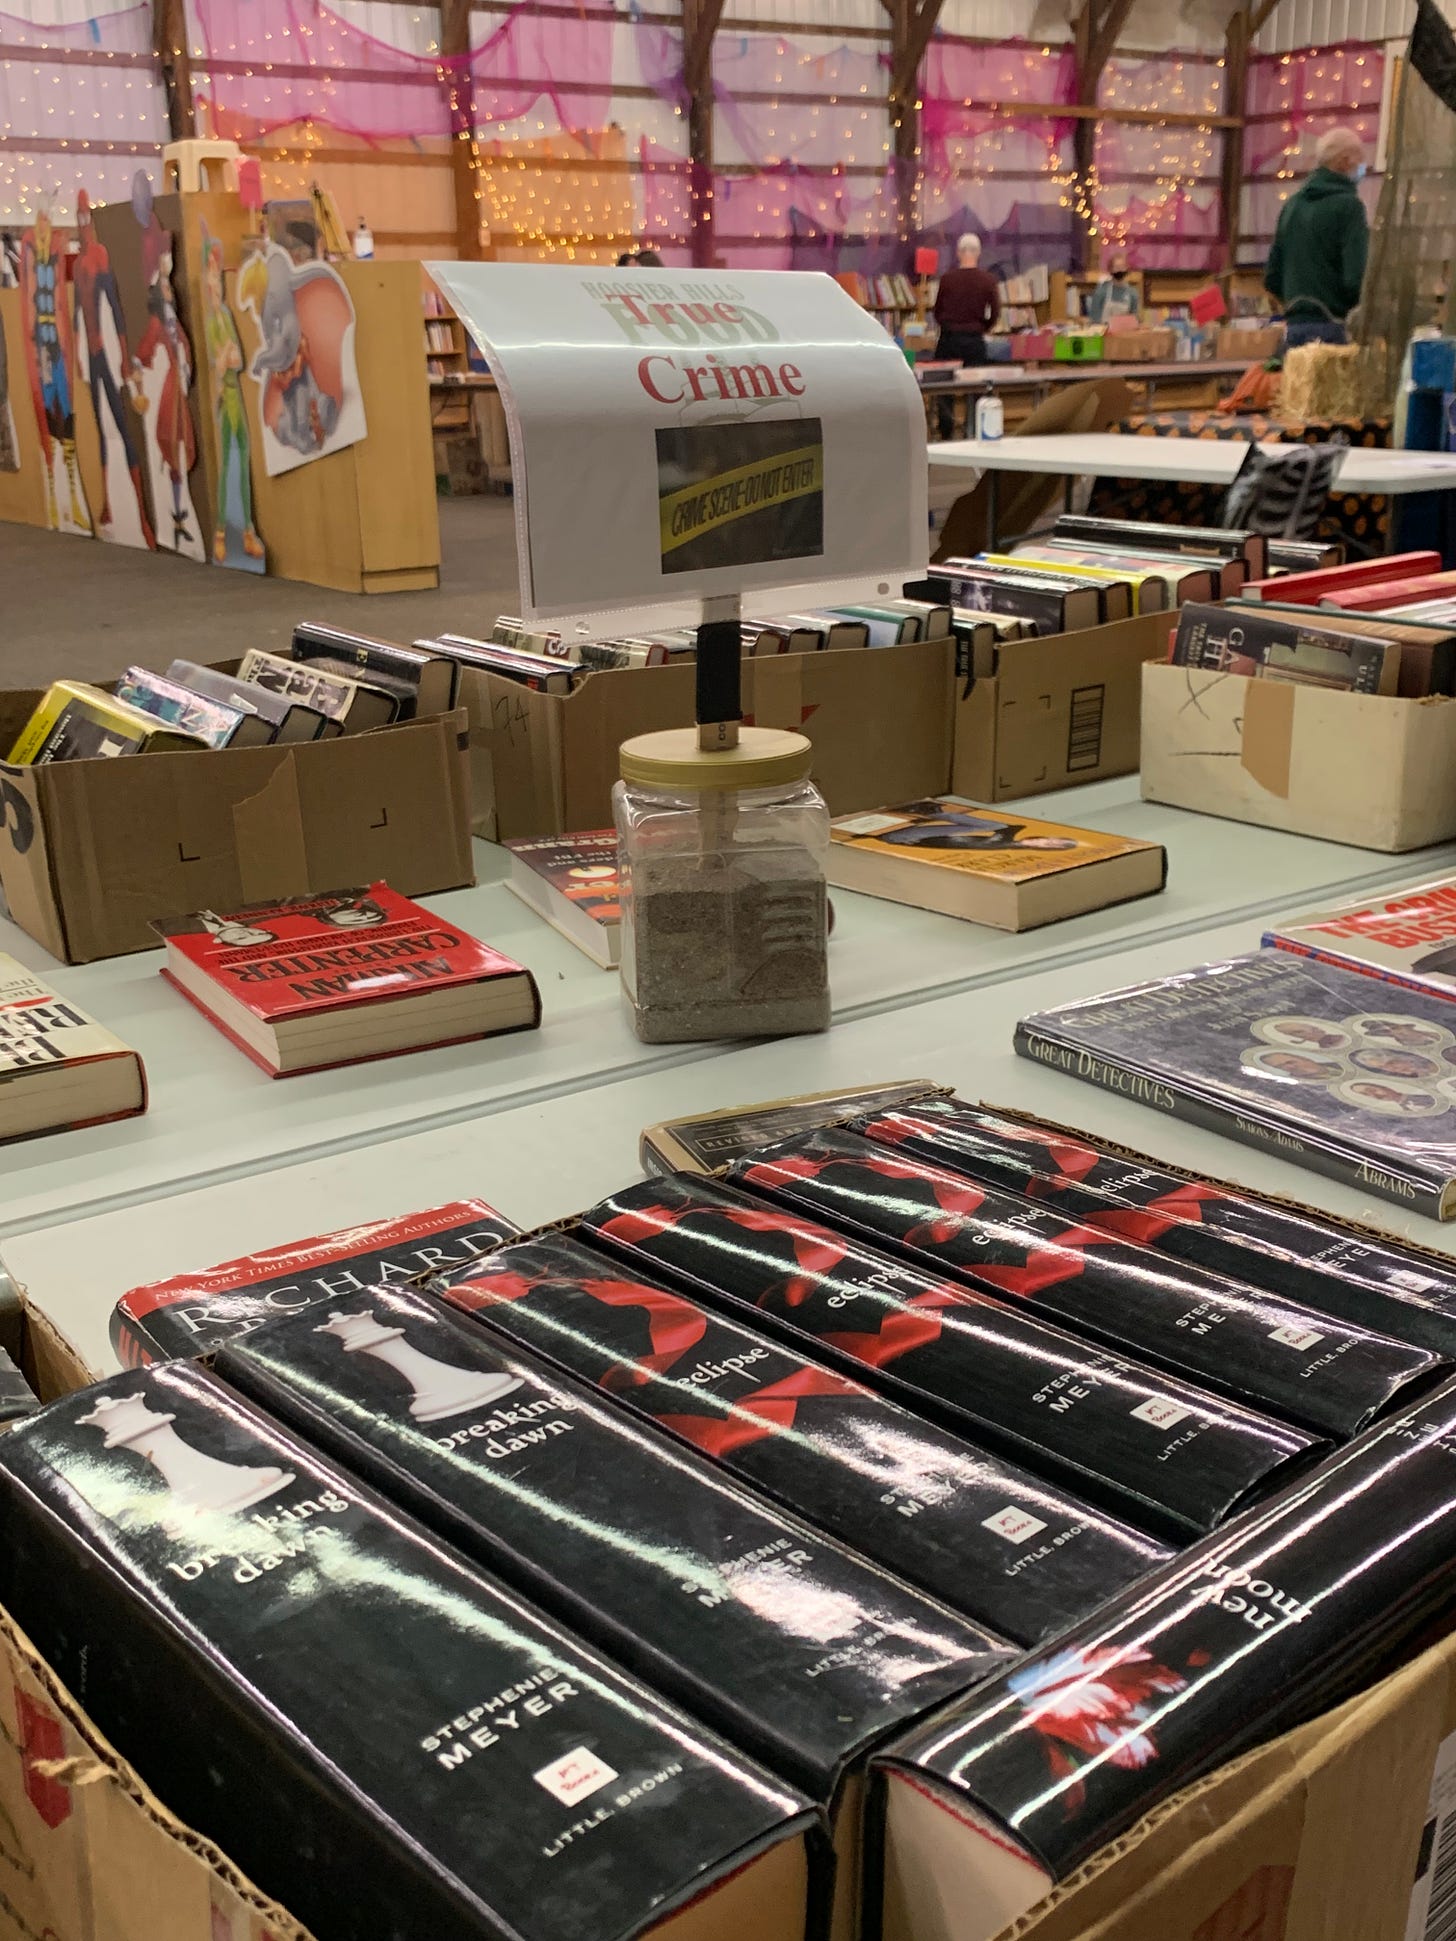 Image of the Twilight books on a table labeled "true crime"